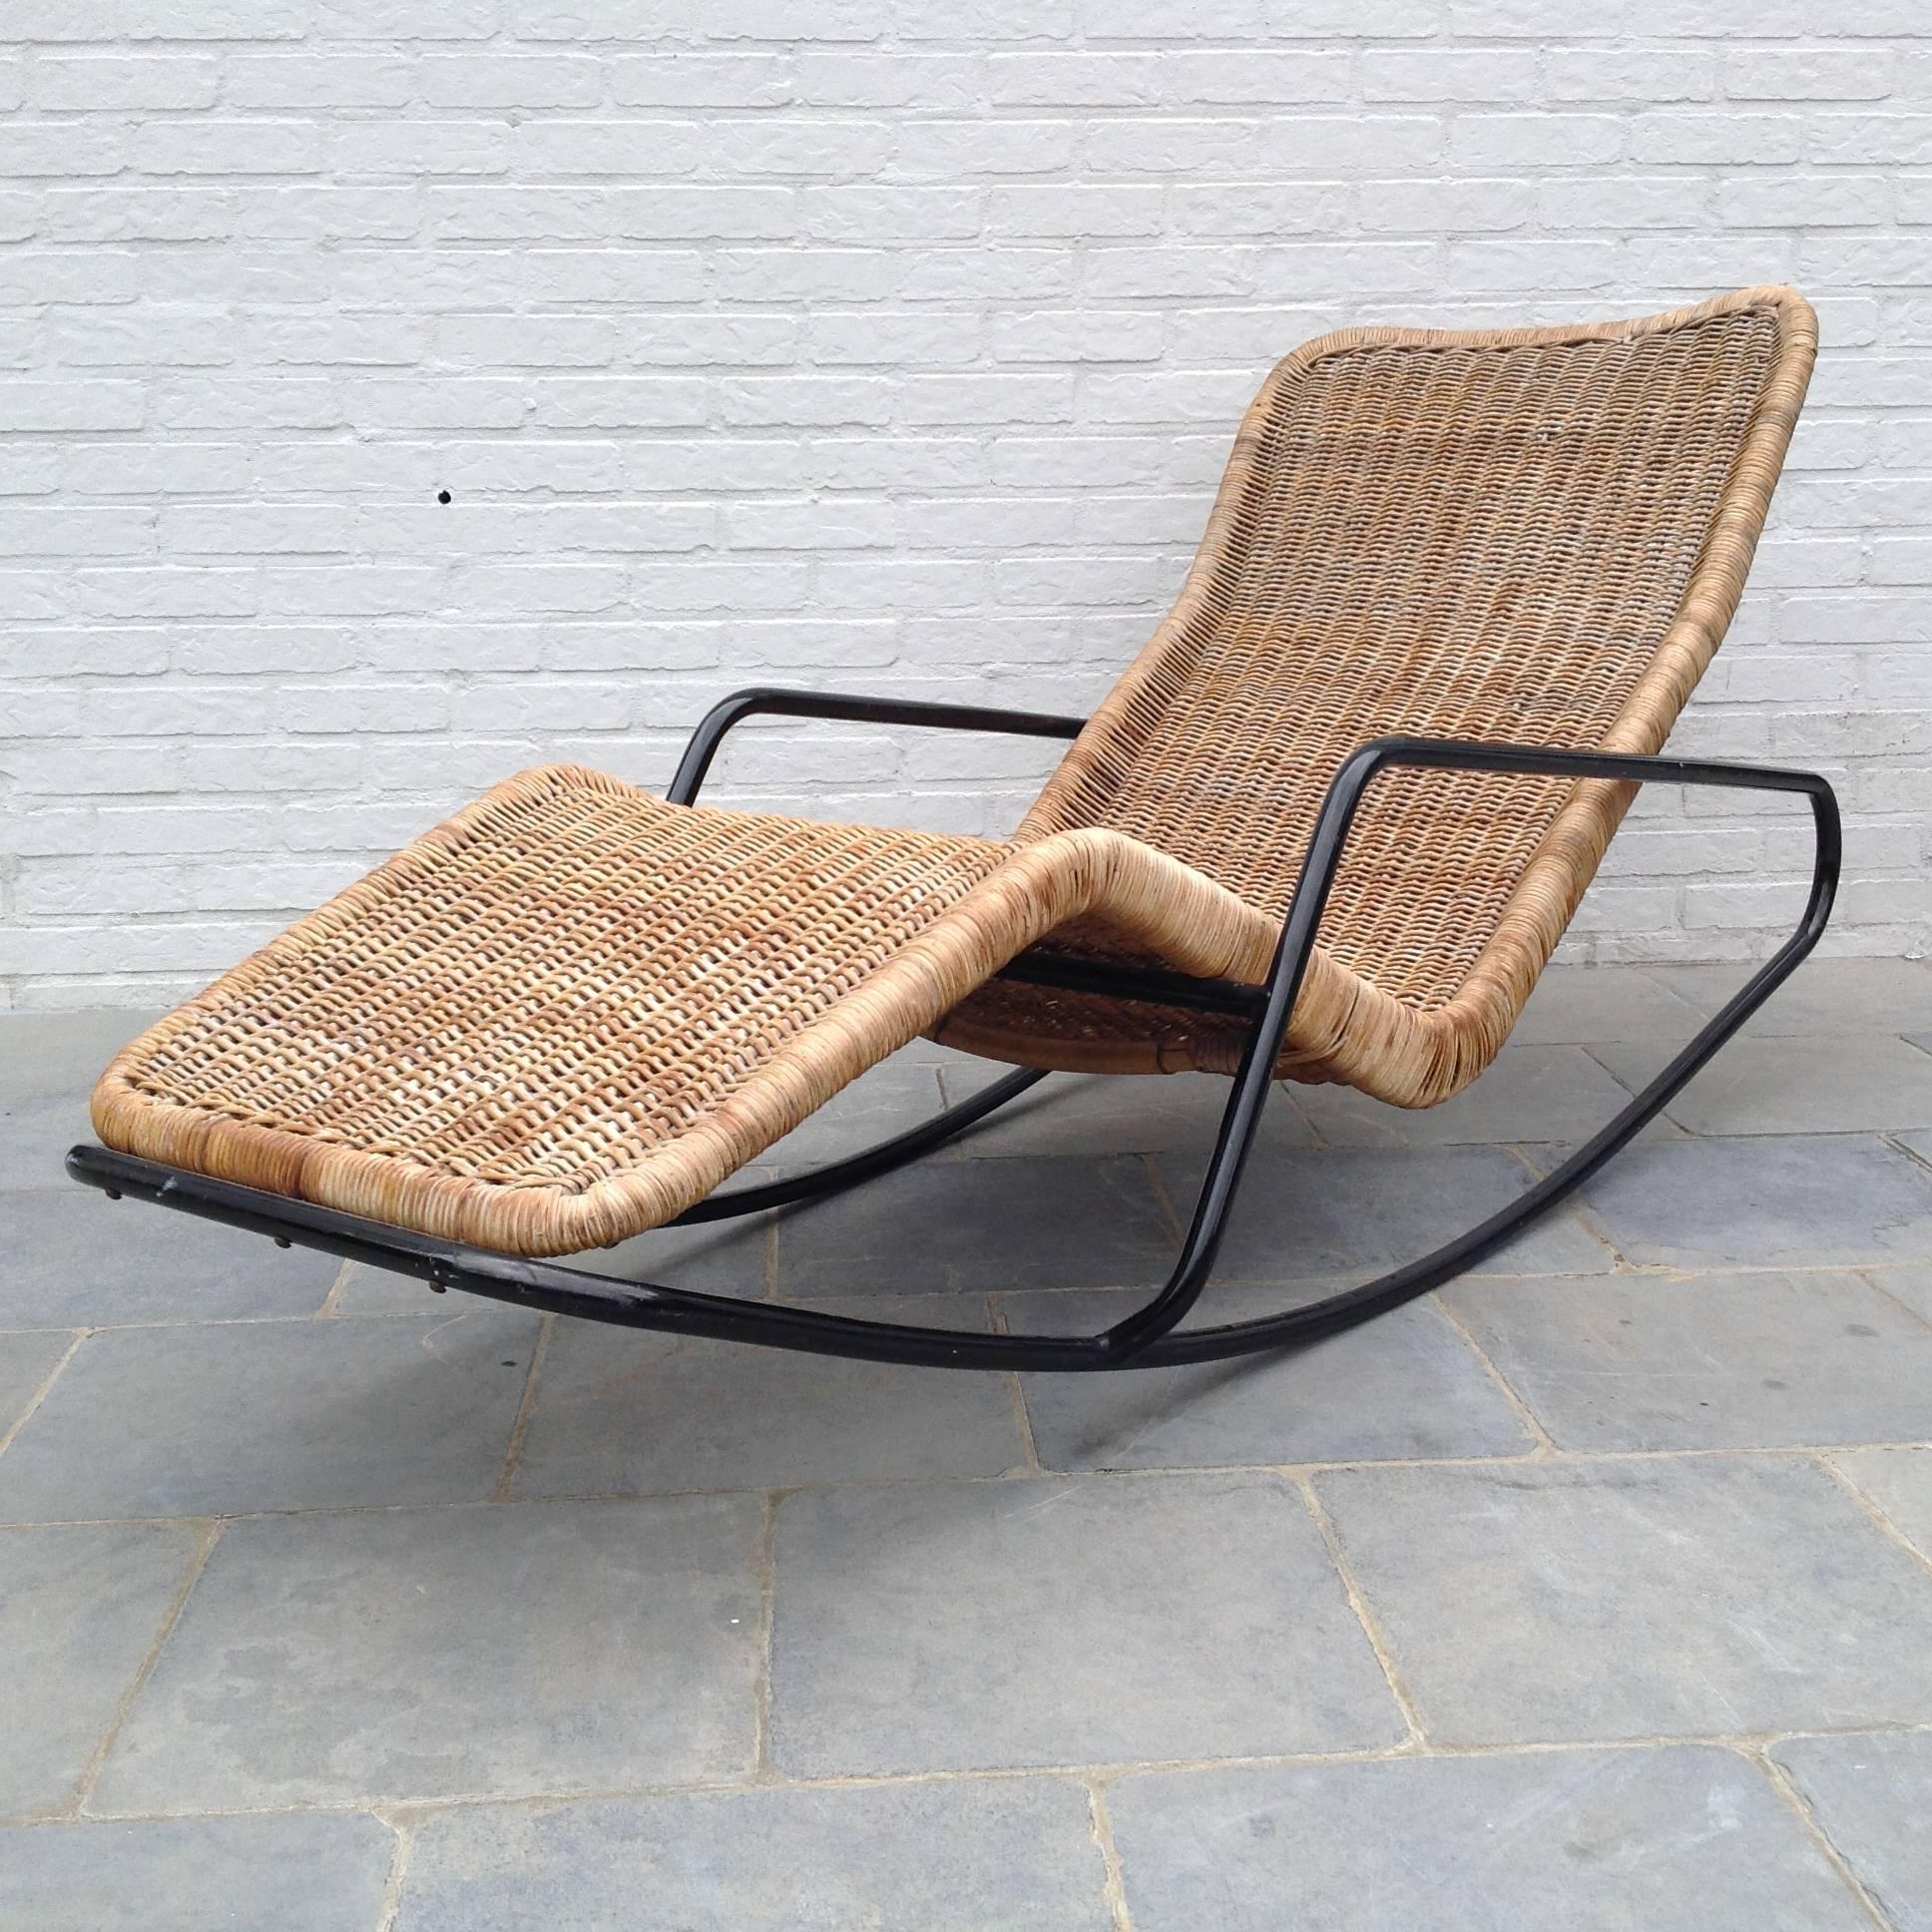 Mid-20th Century Very Rare Rocking Chaise Longue in Cane by Dirk Van Sliedrecht